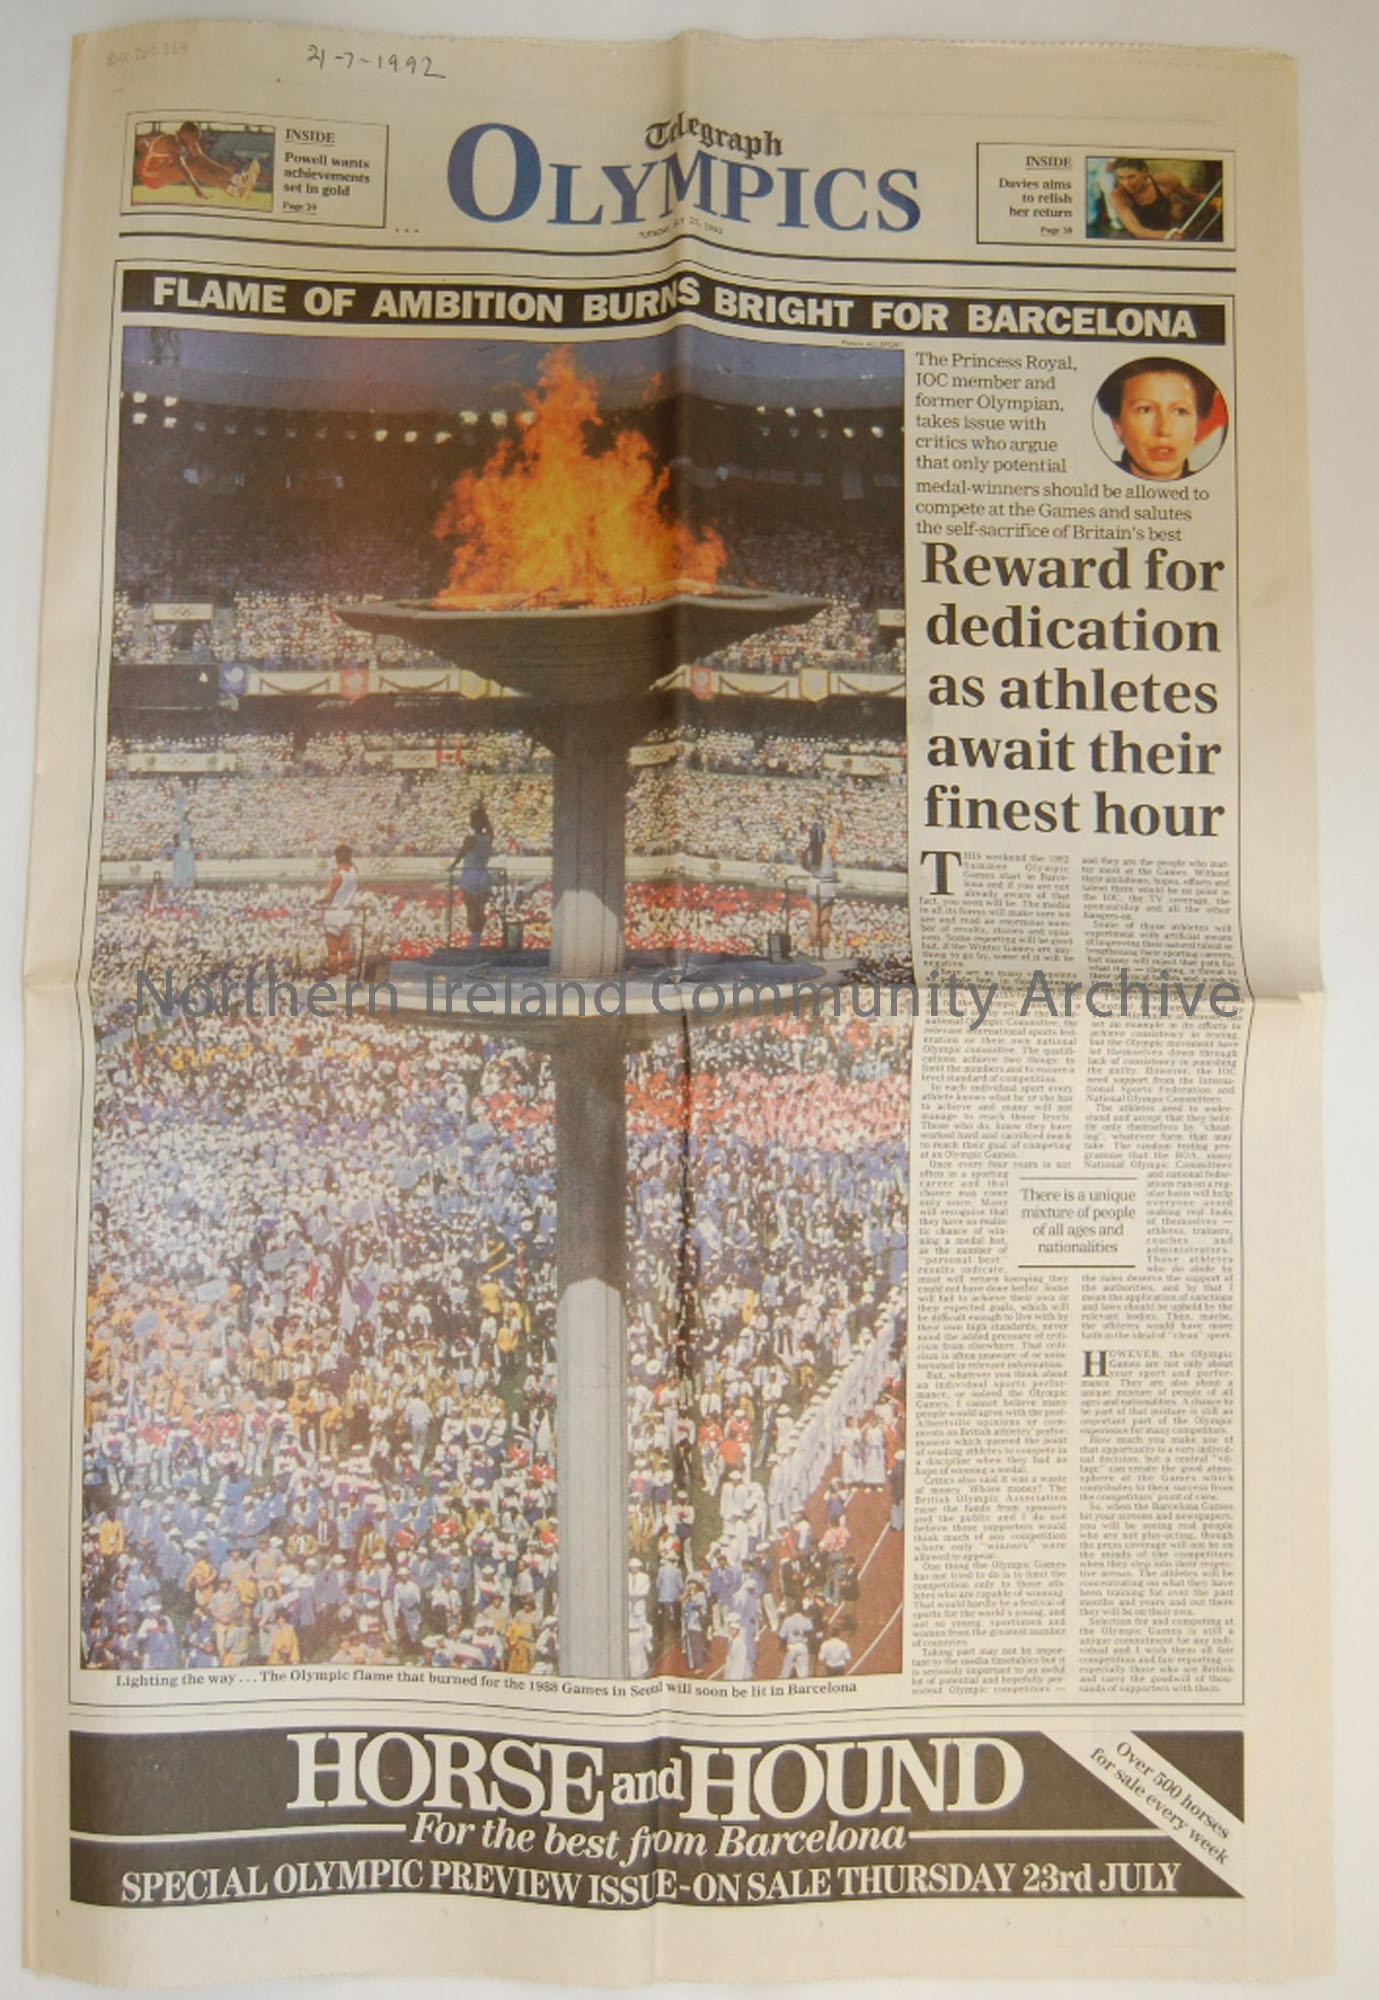 Daily Telegraph. Olympics, Tuesday, July 21 1992